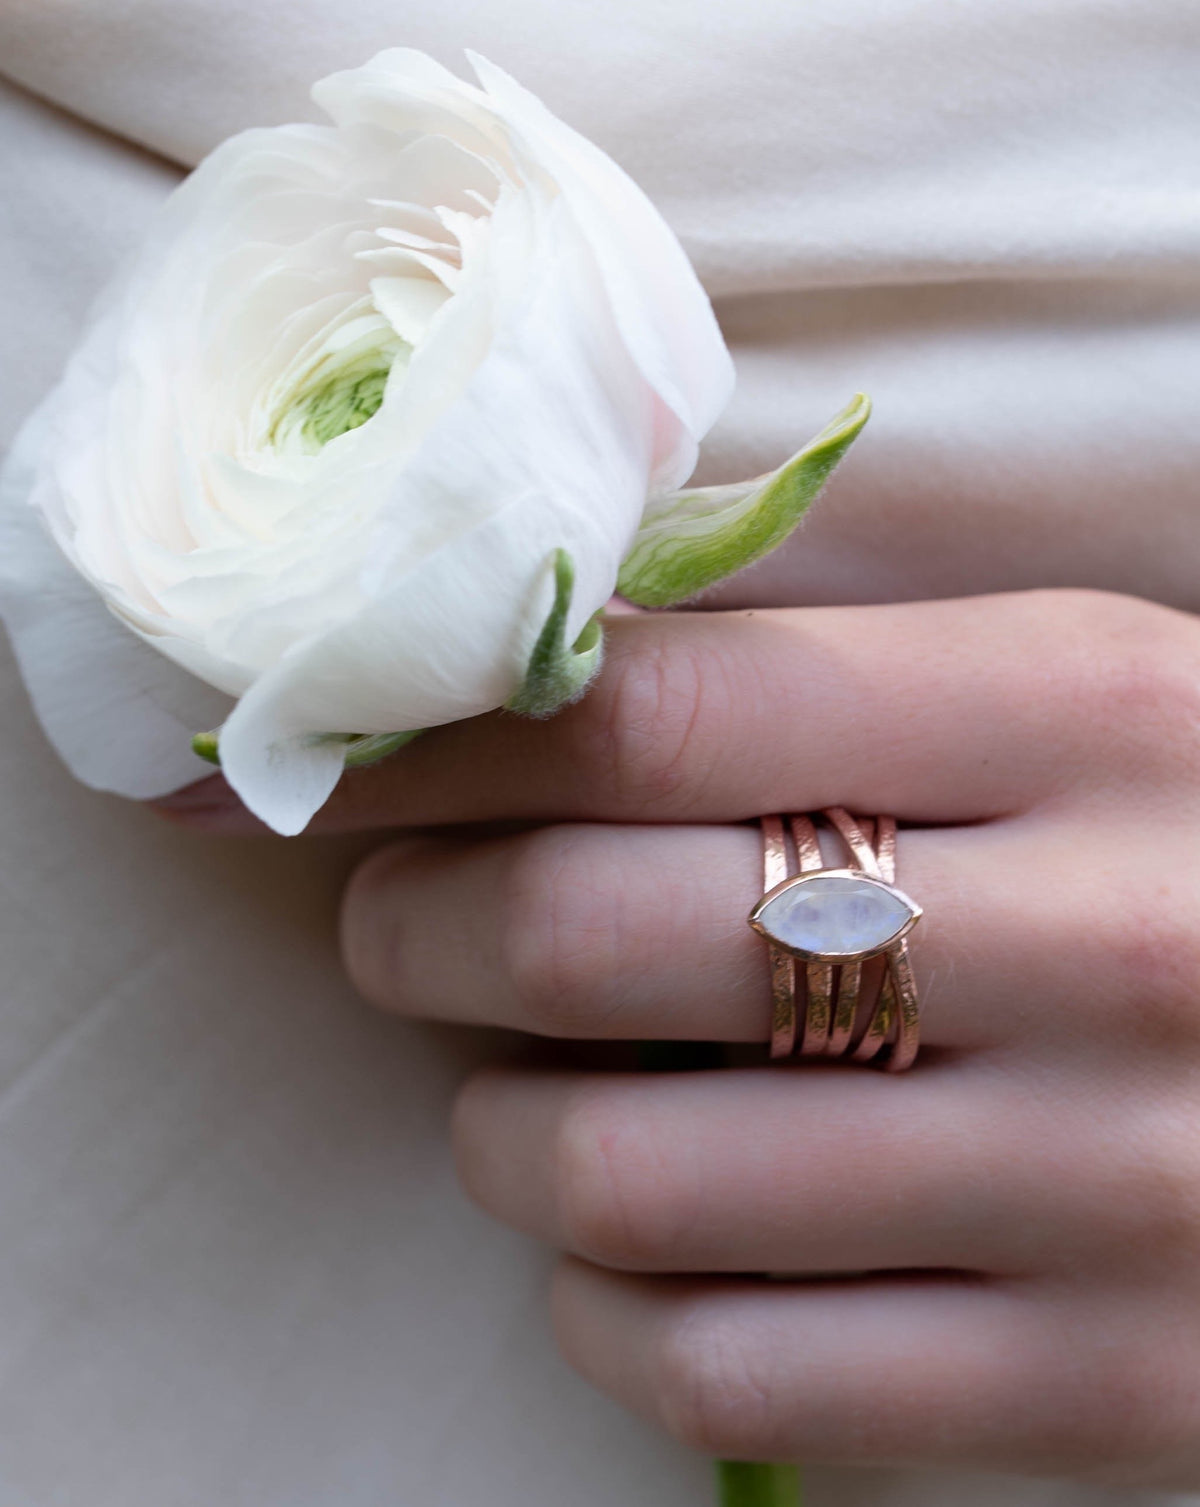 Moonstone Rose Gold Plated Ring *  Statement Ring * Gemstone Ring * Rainbow Moonstone *  Rose Gold Ring BJR135